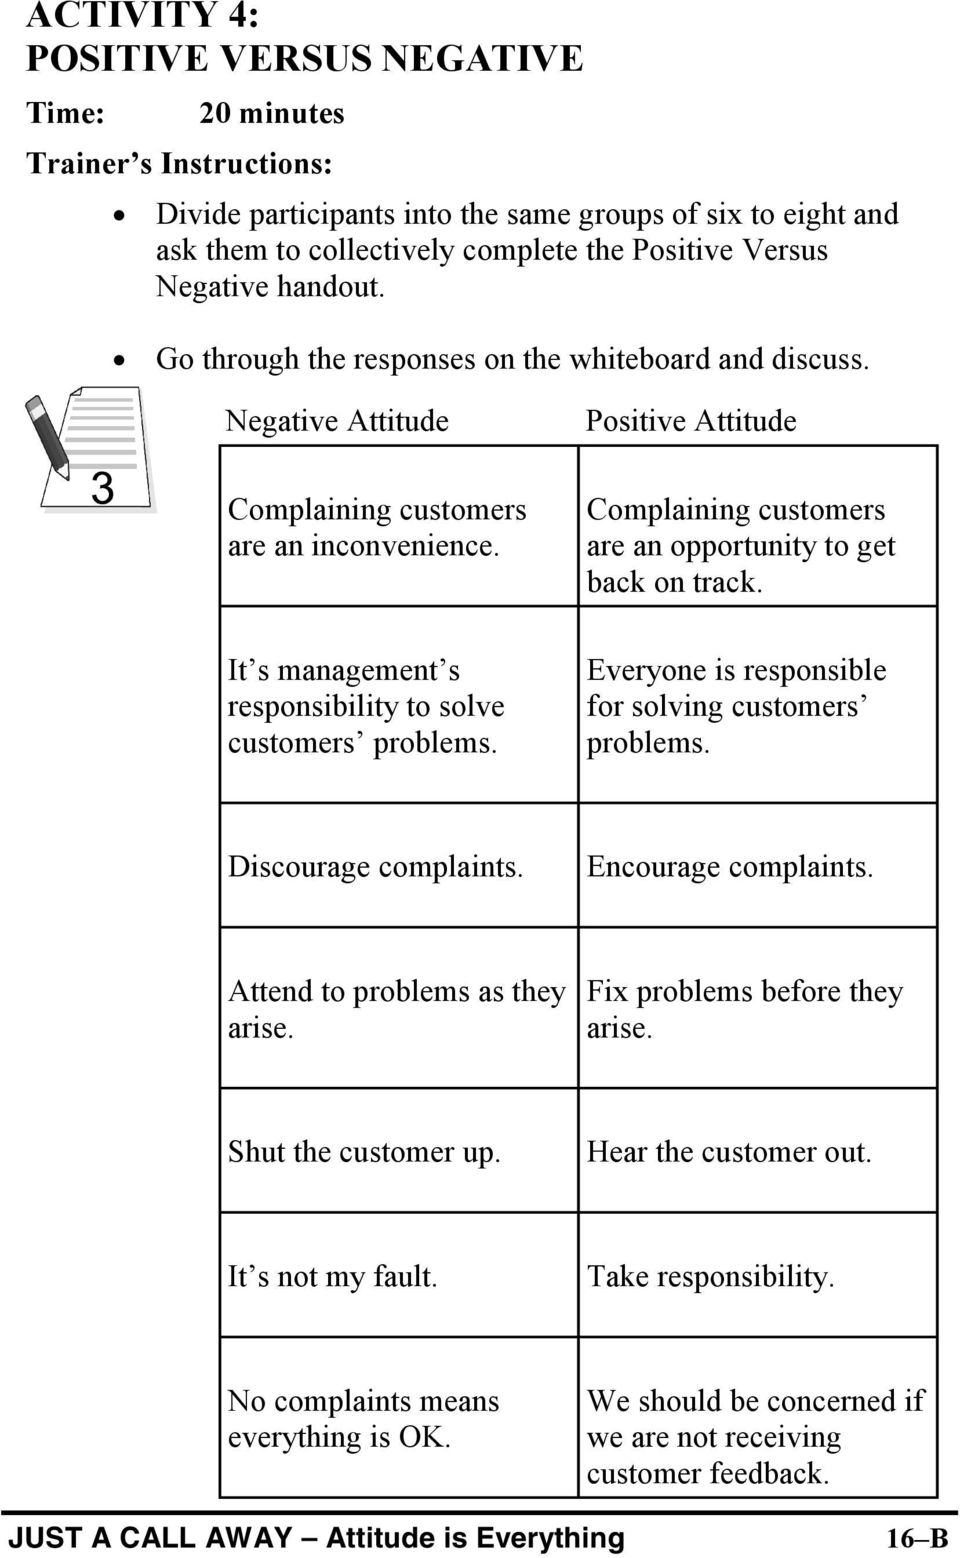 Positive Attitude Complaining customers are an opportunity to get back on track. Everyone is responsible for solving customers problems. Discourage complaints. Encourage complaints.